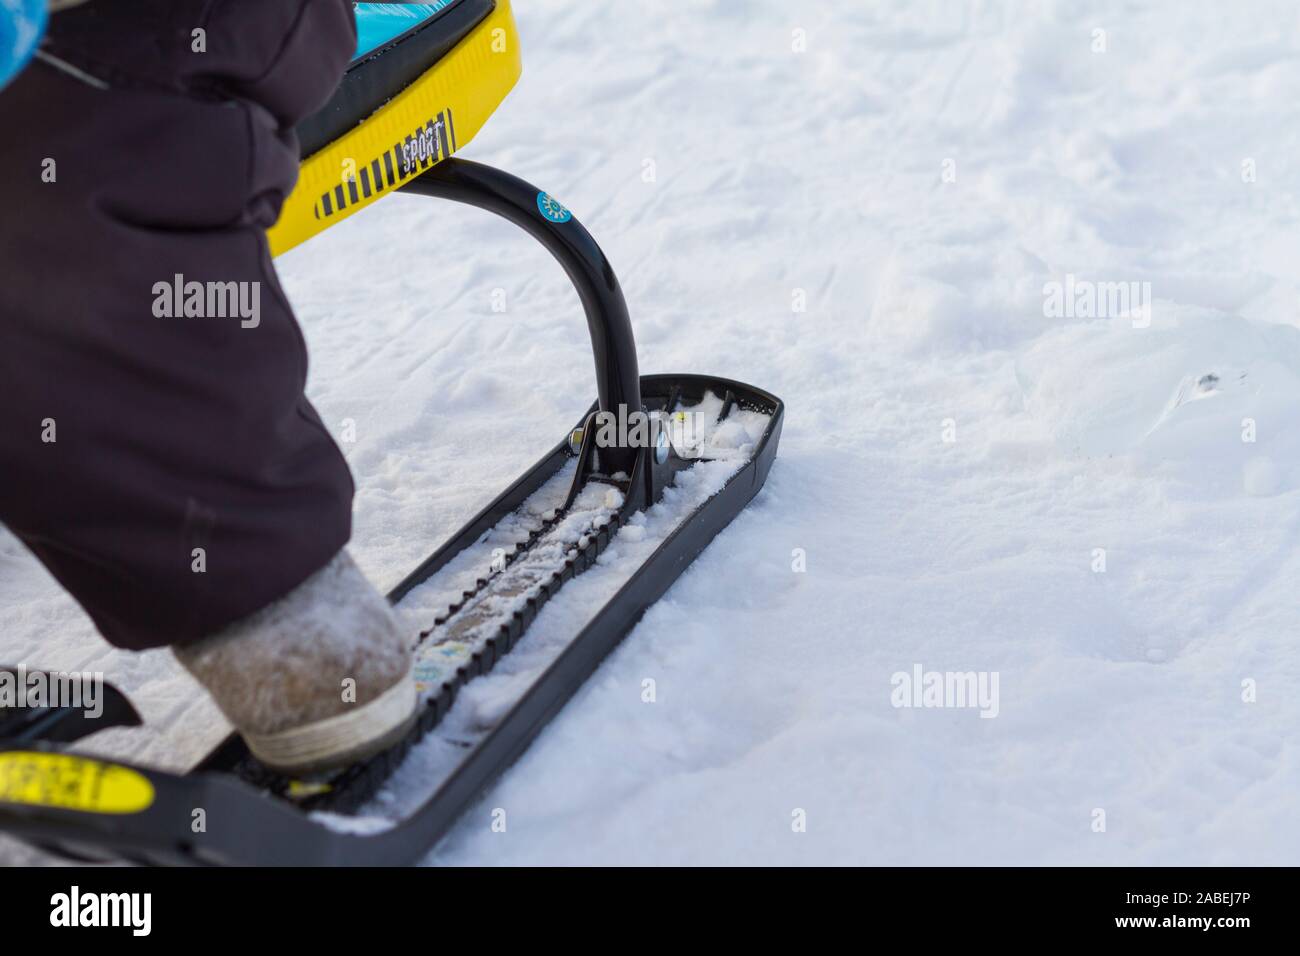 Little boy sitting on snow scooter. Close up. Winter health lifestyle concept. Stock Photo